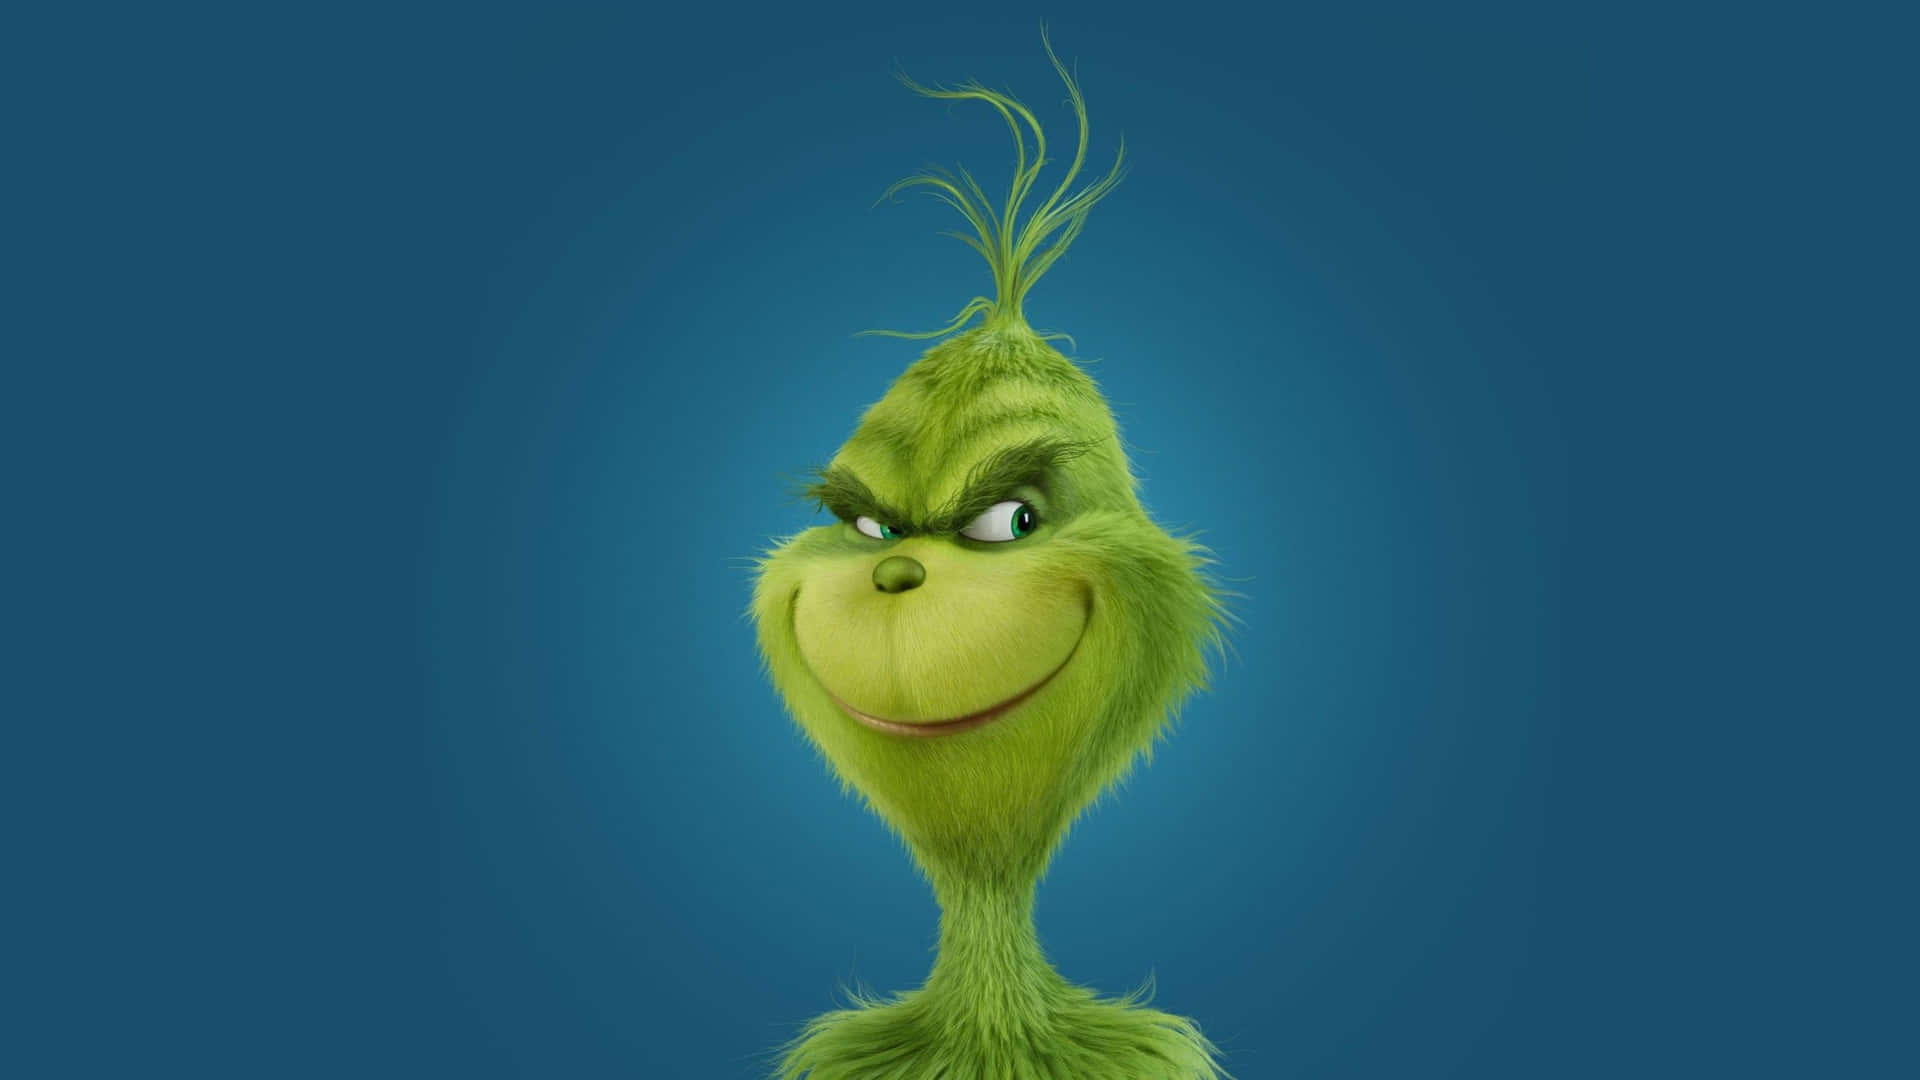 The Grinch Is Smiling In Front Of A Blue Background